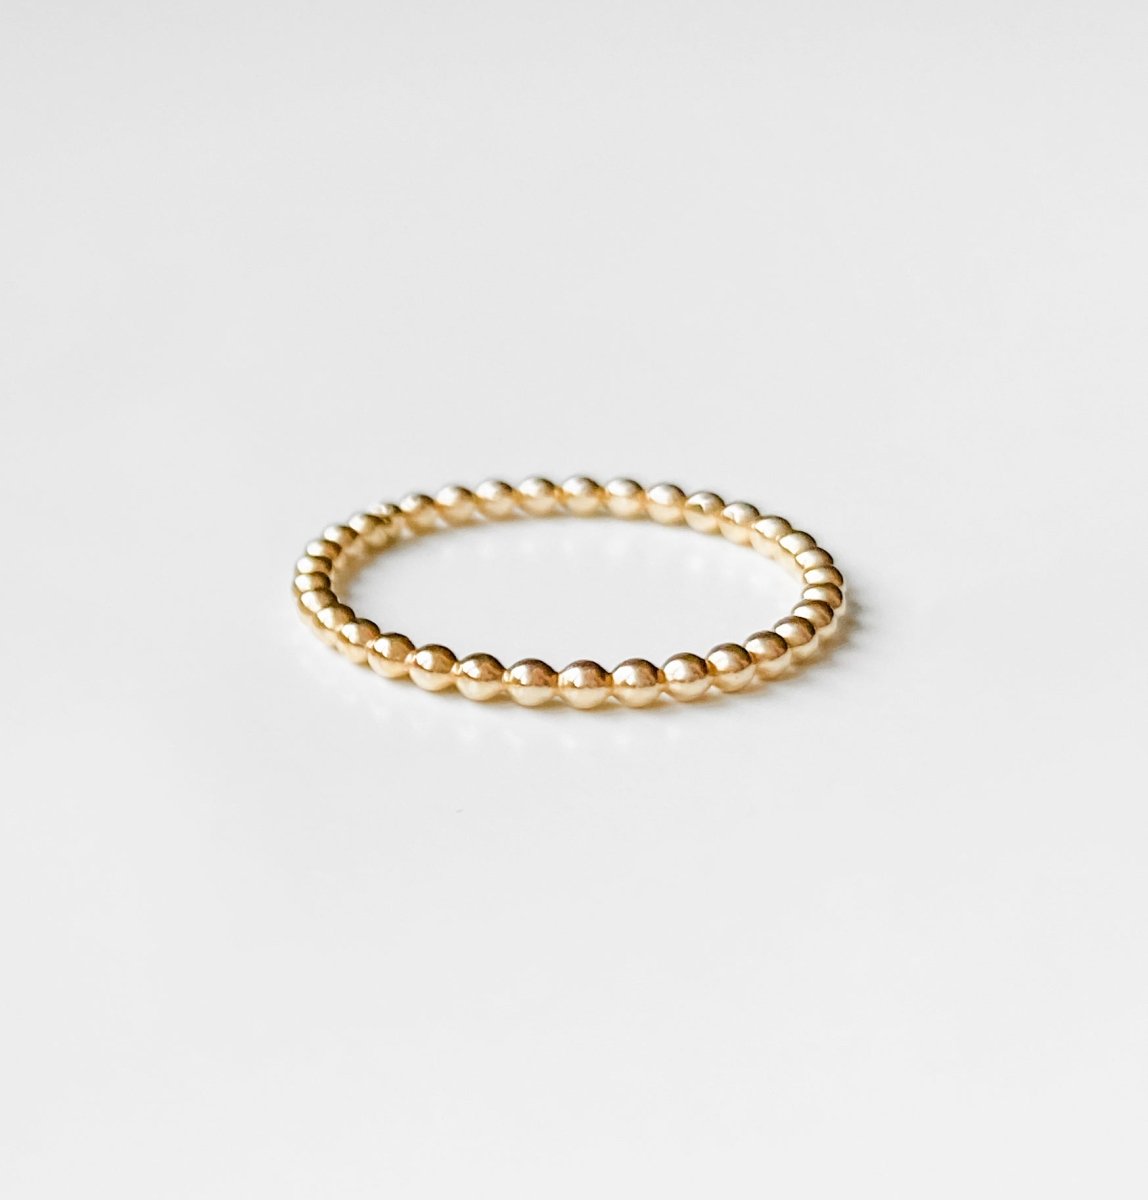 Beaded Stacking Ring - Everlove Jewelry Co.